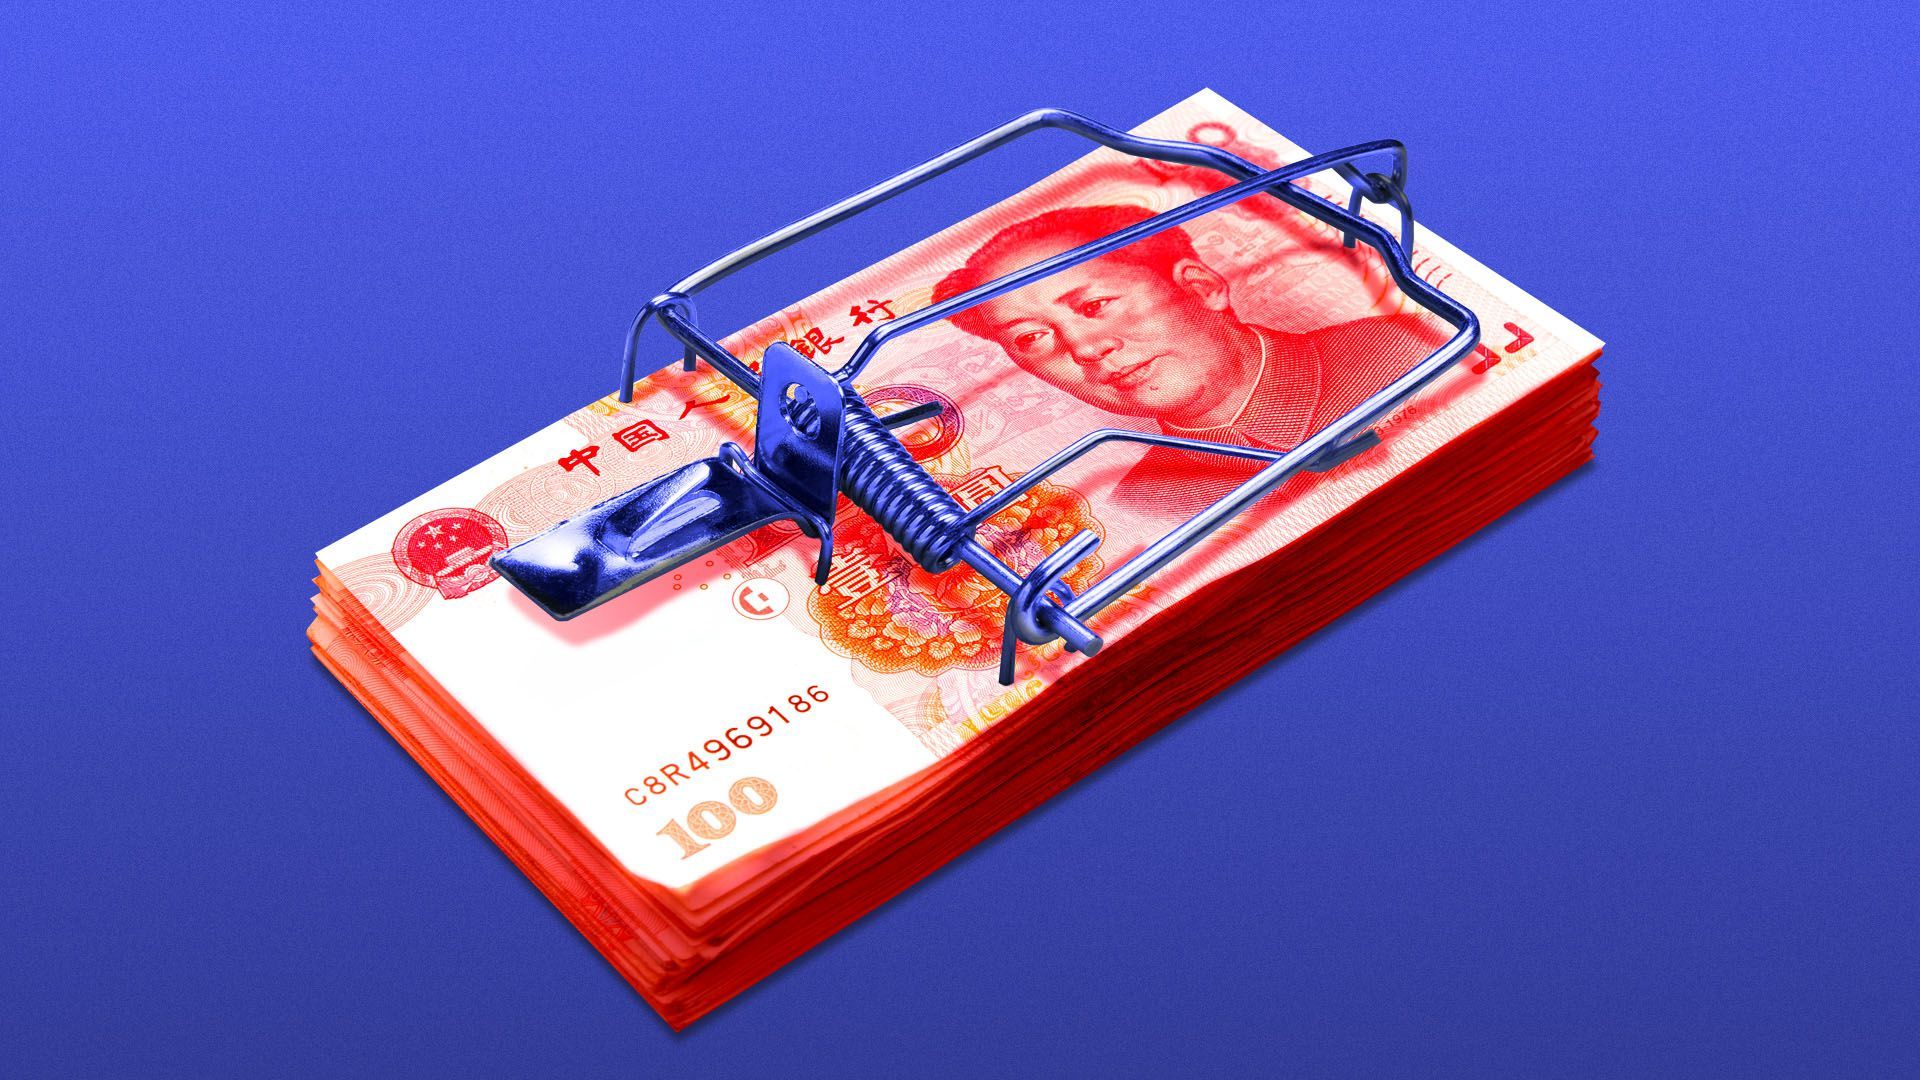 Illustration of a stack of yuan as a mousetrap